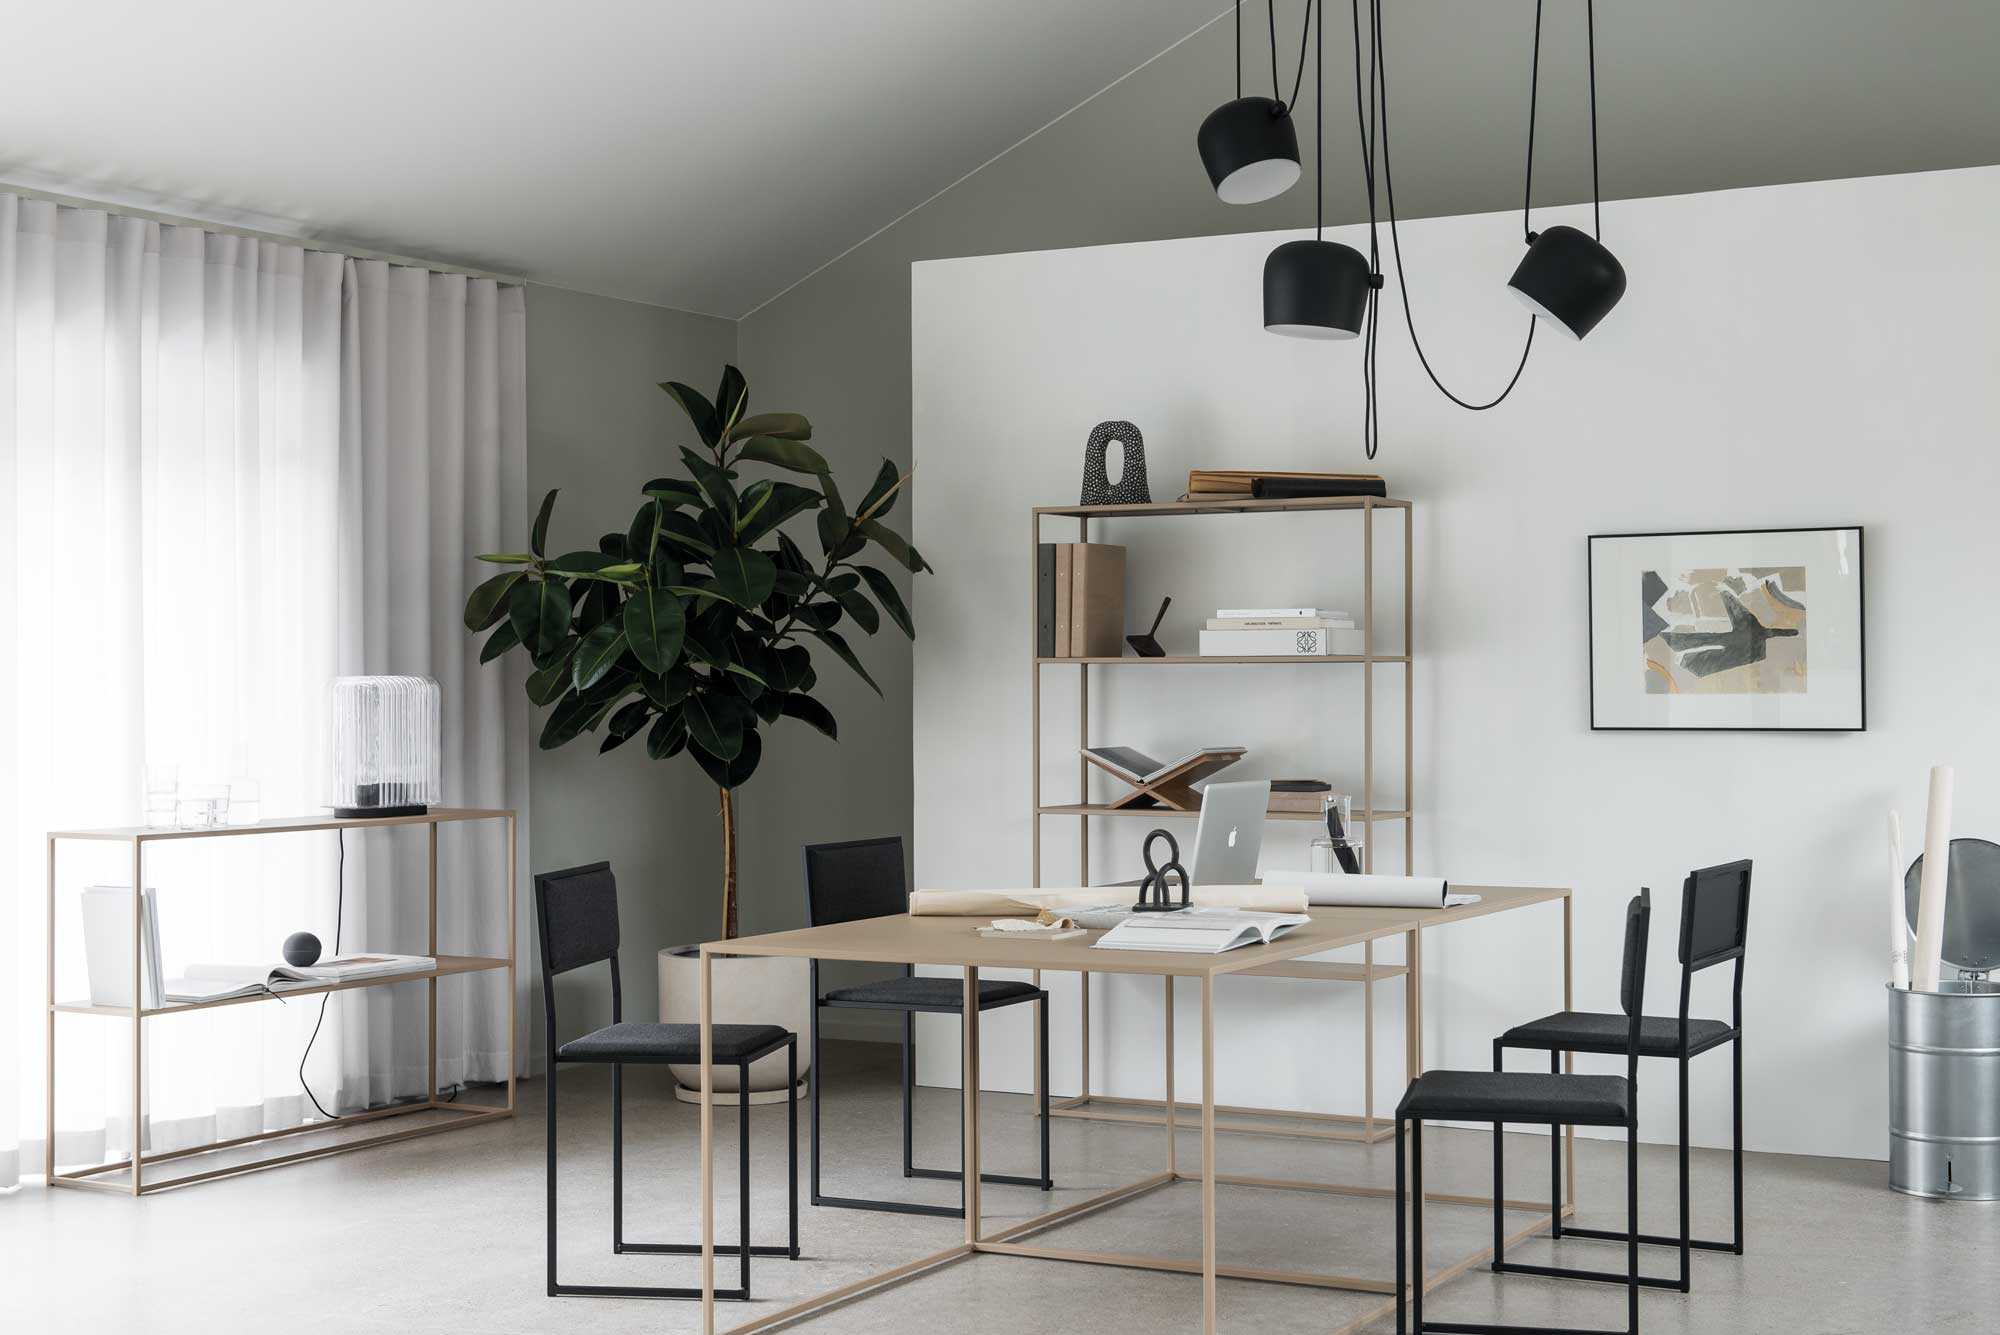 Minimalist Scandinavian furniture from Design Of | These Four Walls blog